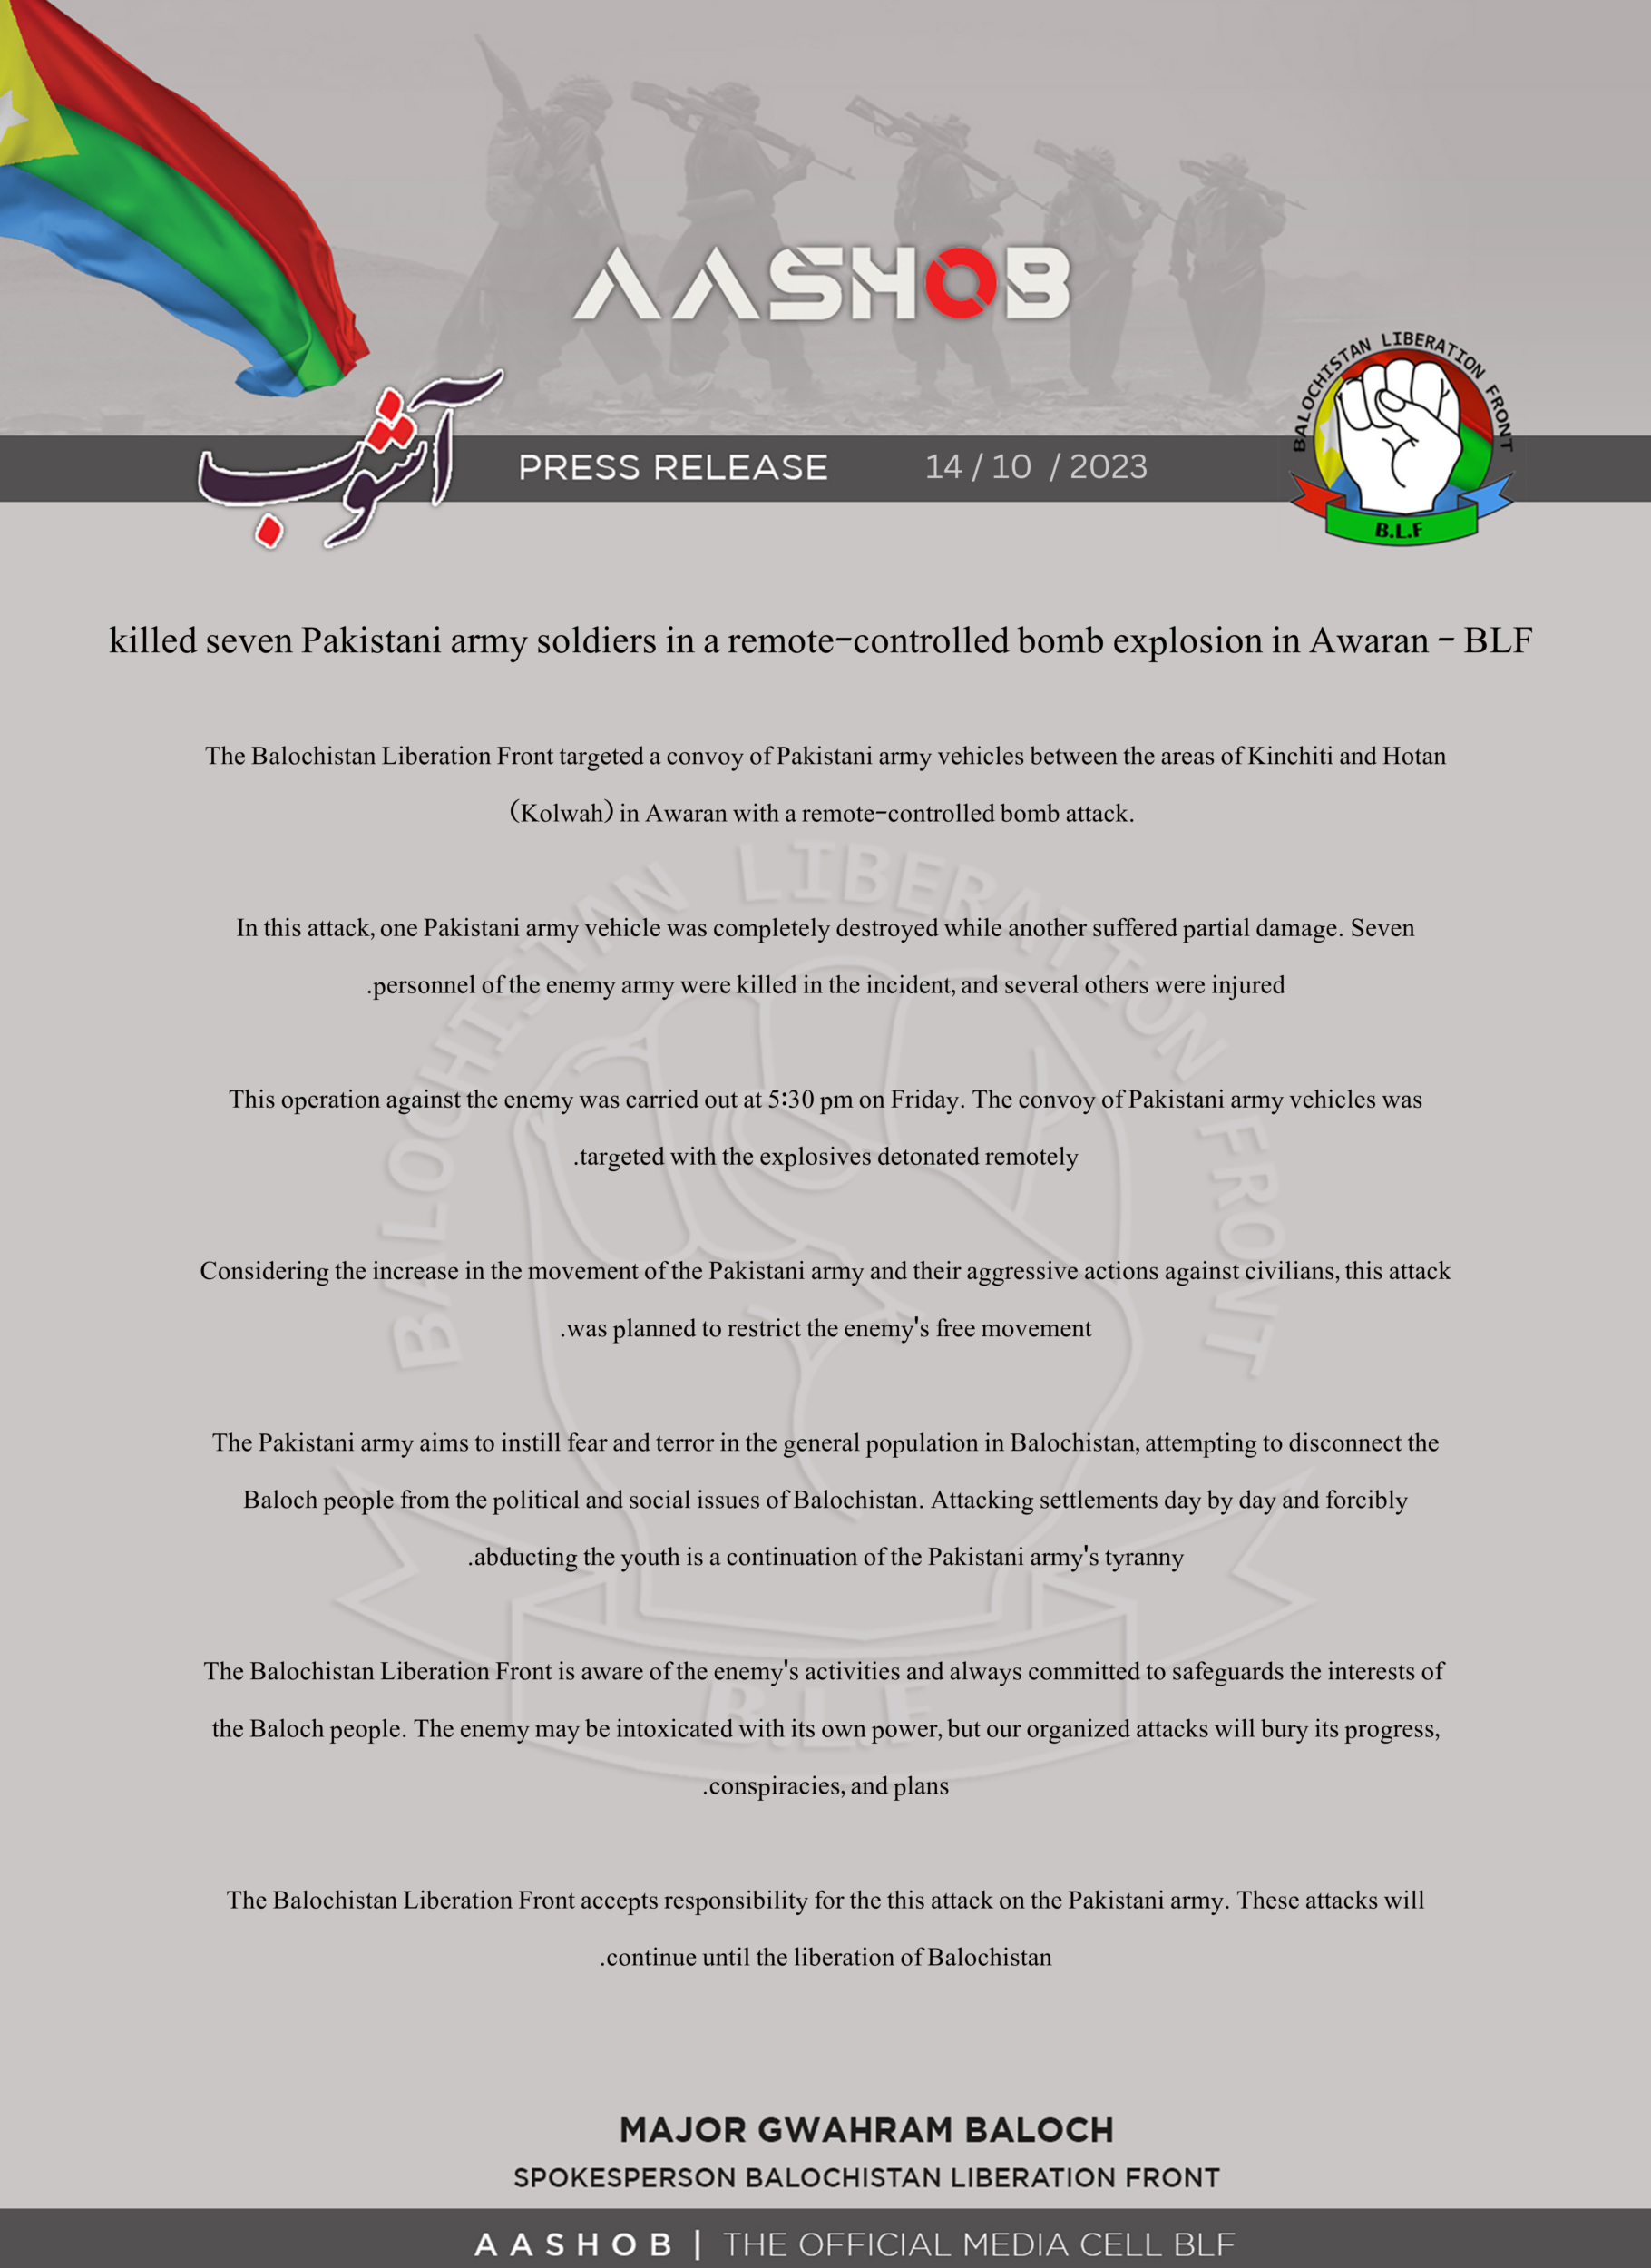 TRAC Incident Report: Balochistan Liberation Front (BLF) Targeted a Pakistani Army Convoy with a Remote Controlled IED, at Kup between Kinchiti & Hotan, Kolwah Area, Awaran, Balochistan, Pakistan - 13 October 2023